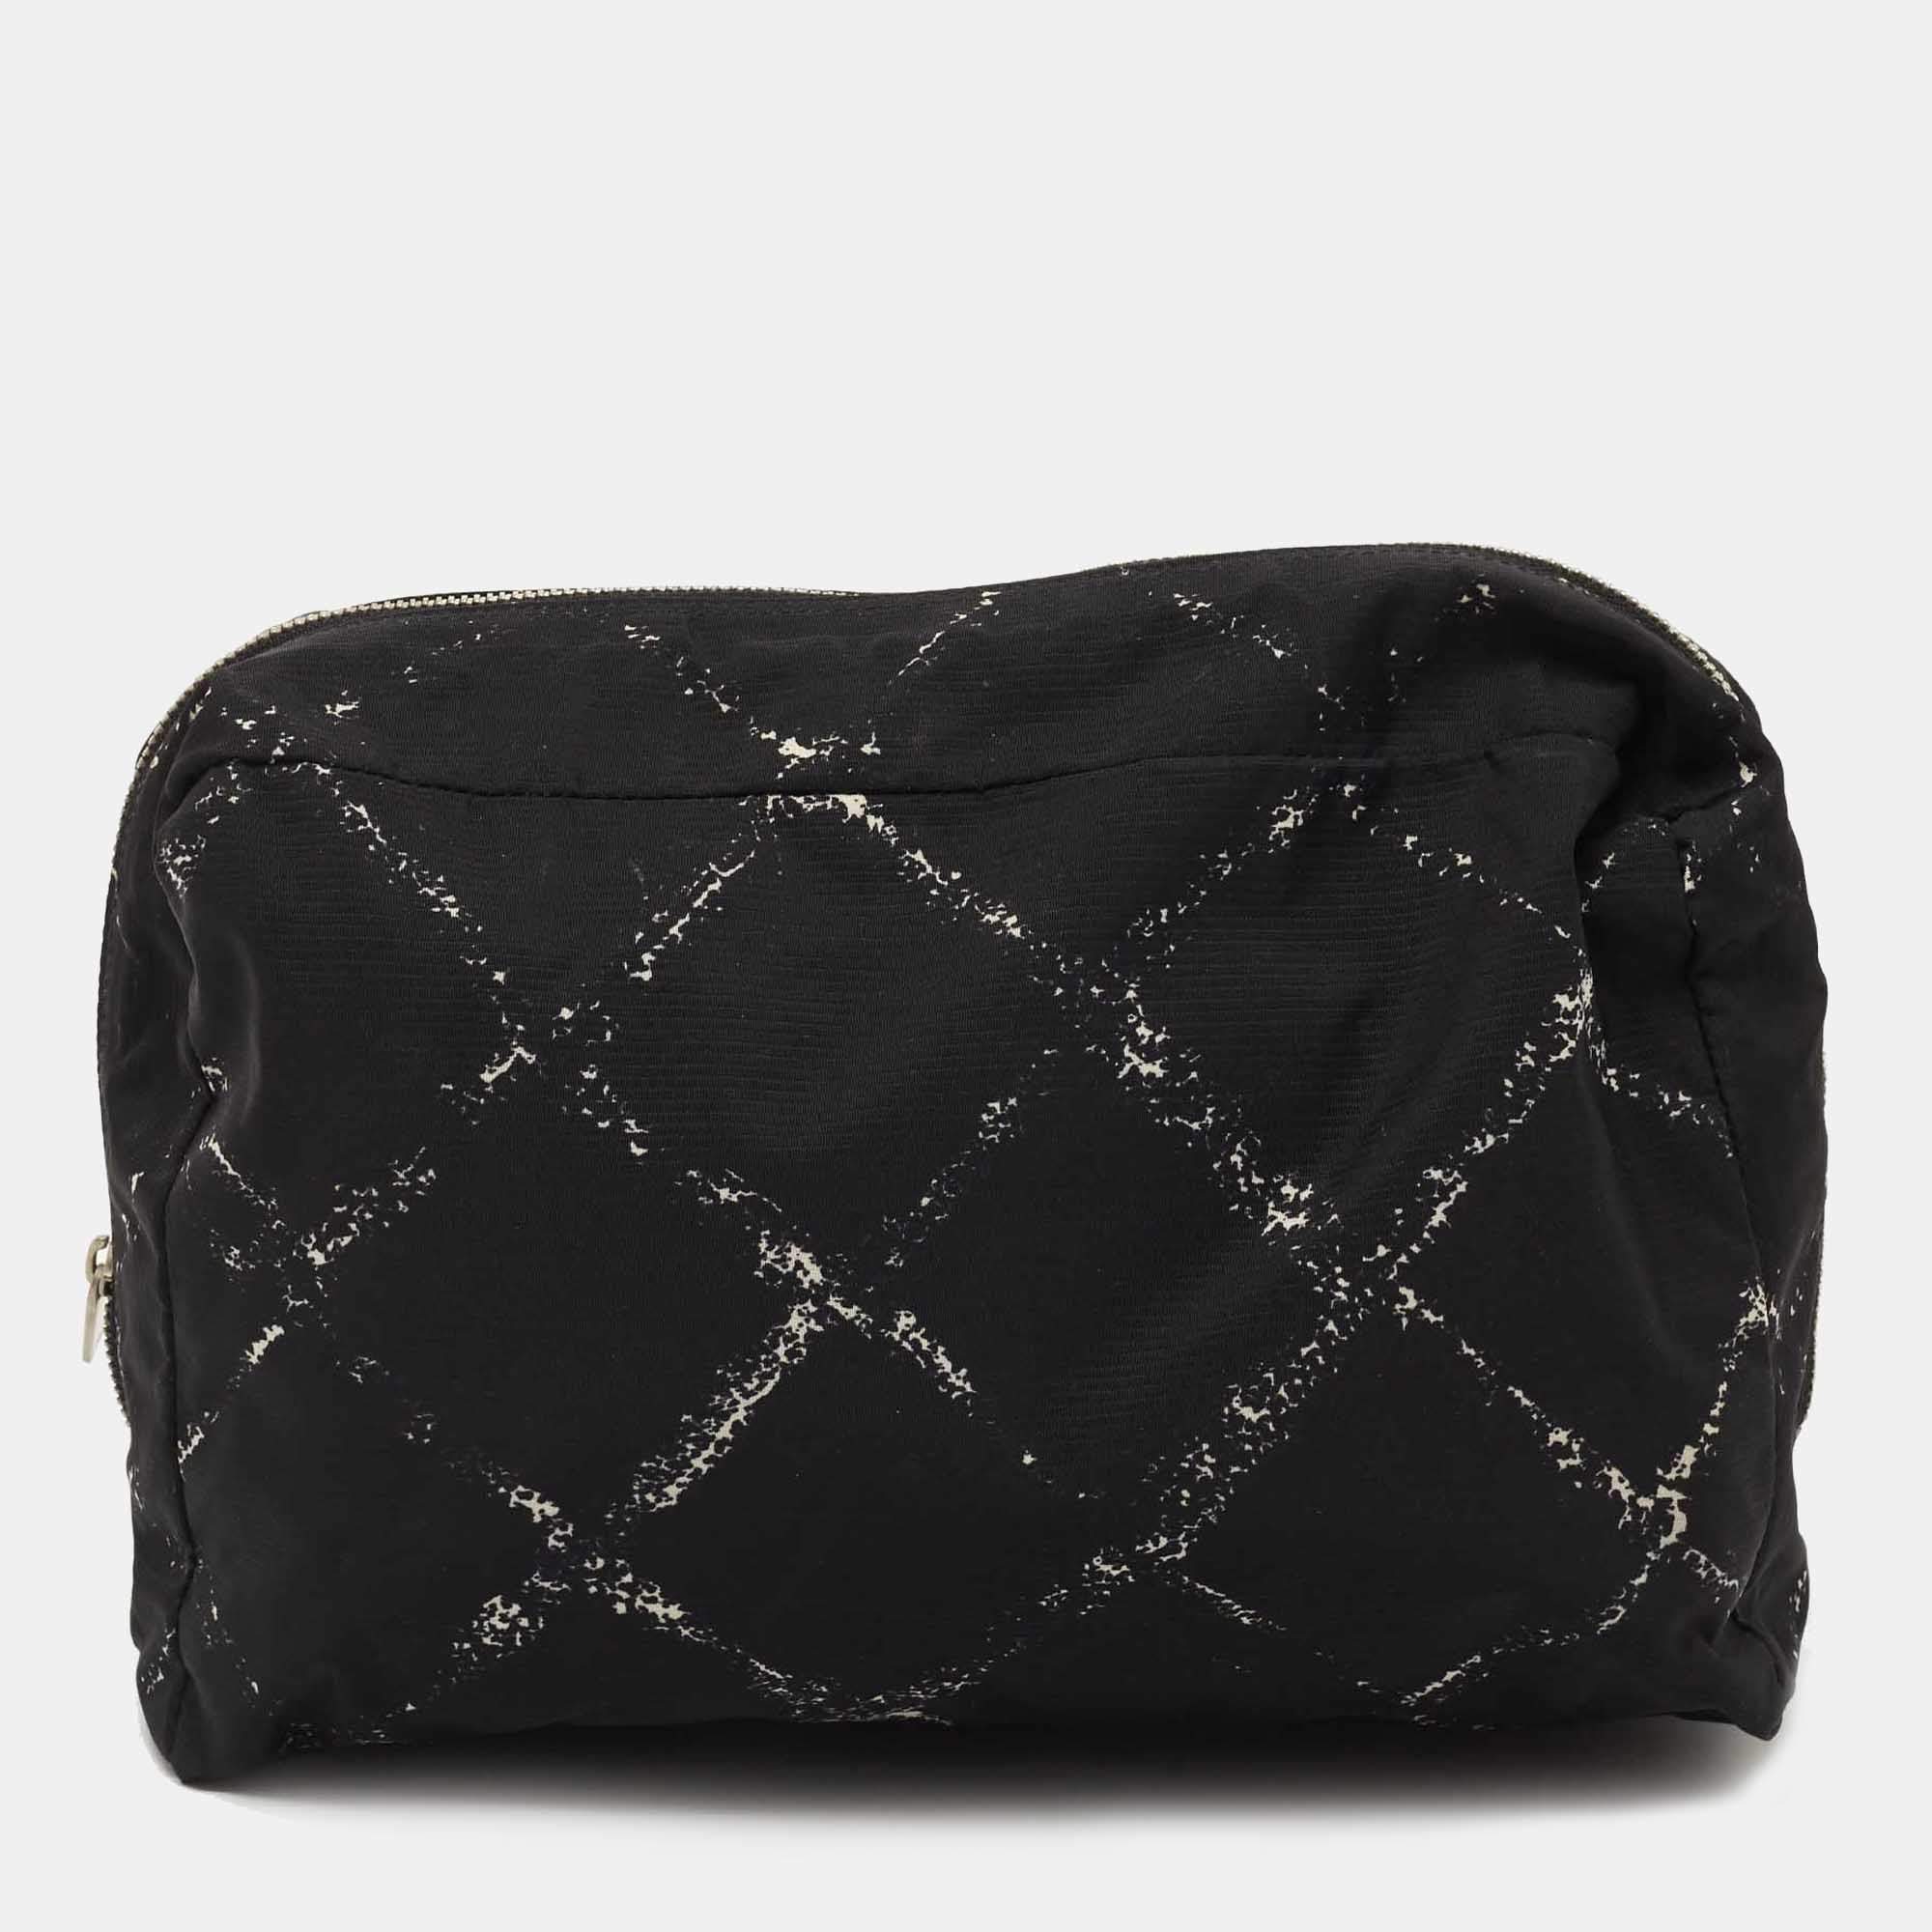 Chanel Black/White Quilted Print Nylon Travel Ligne Cosmetic Pouch